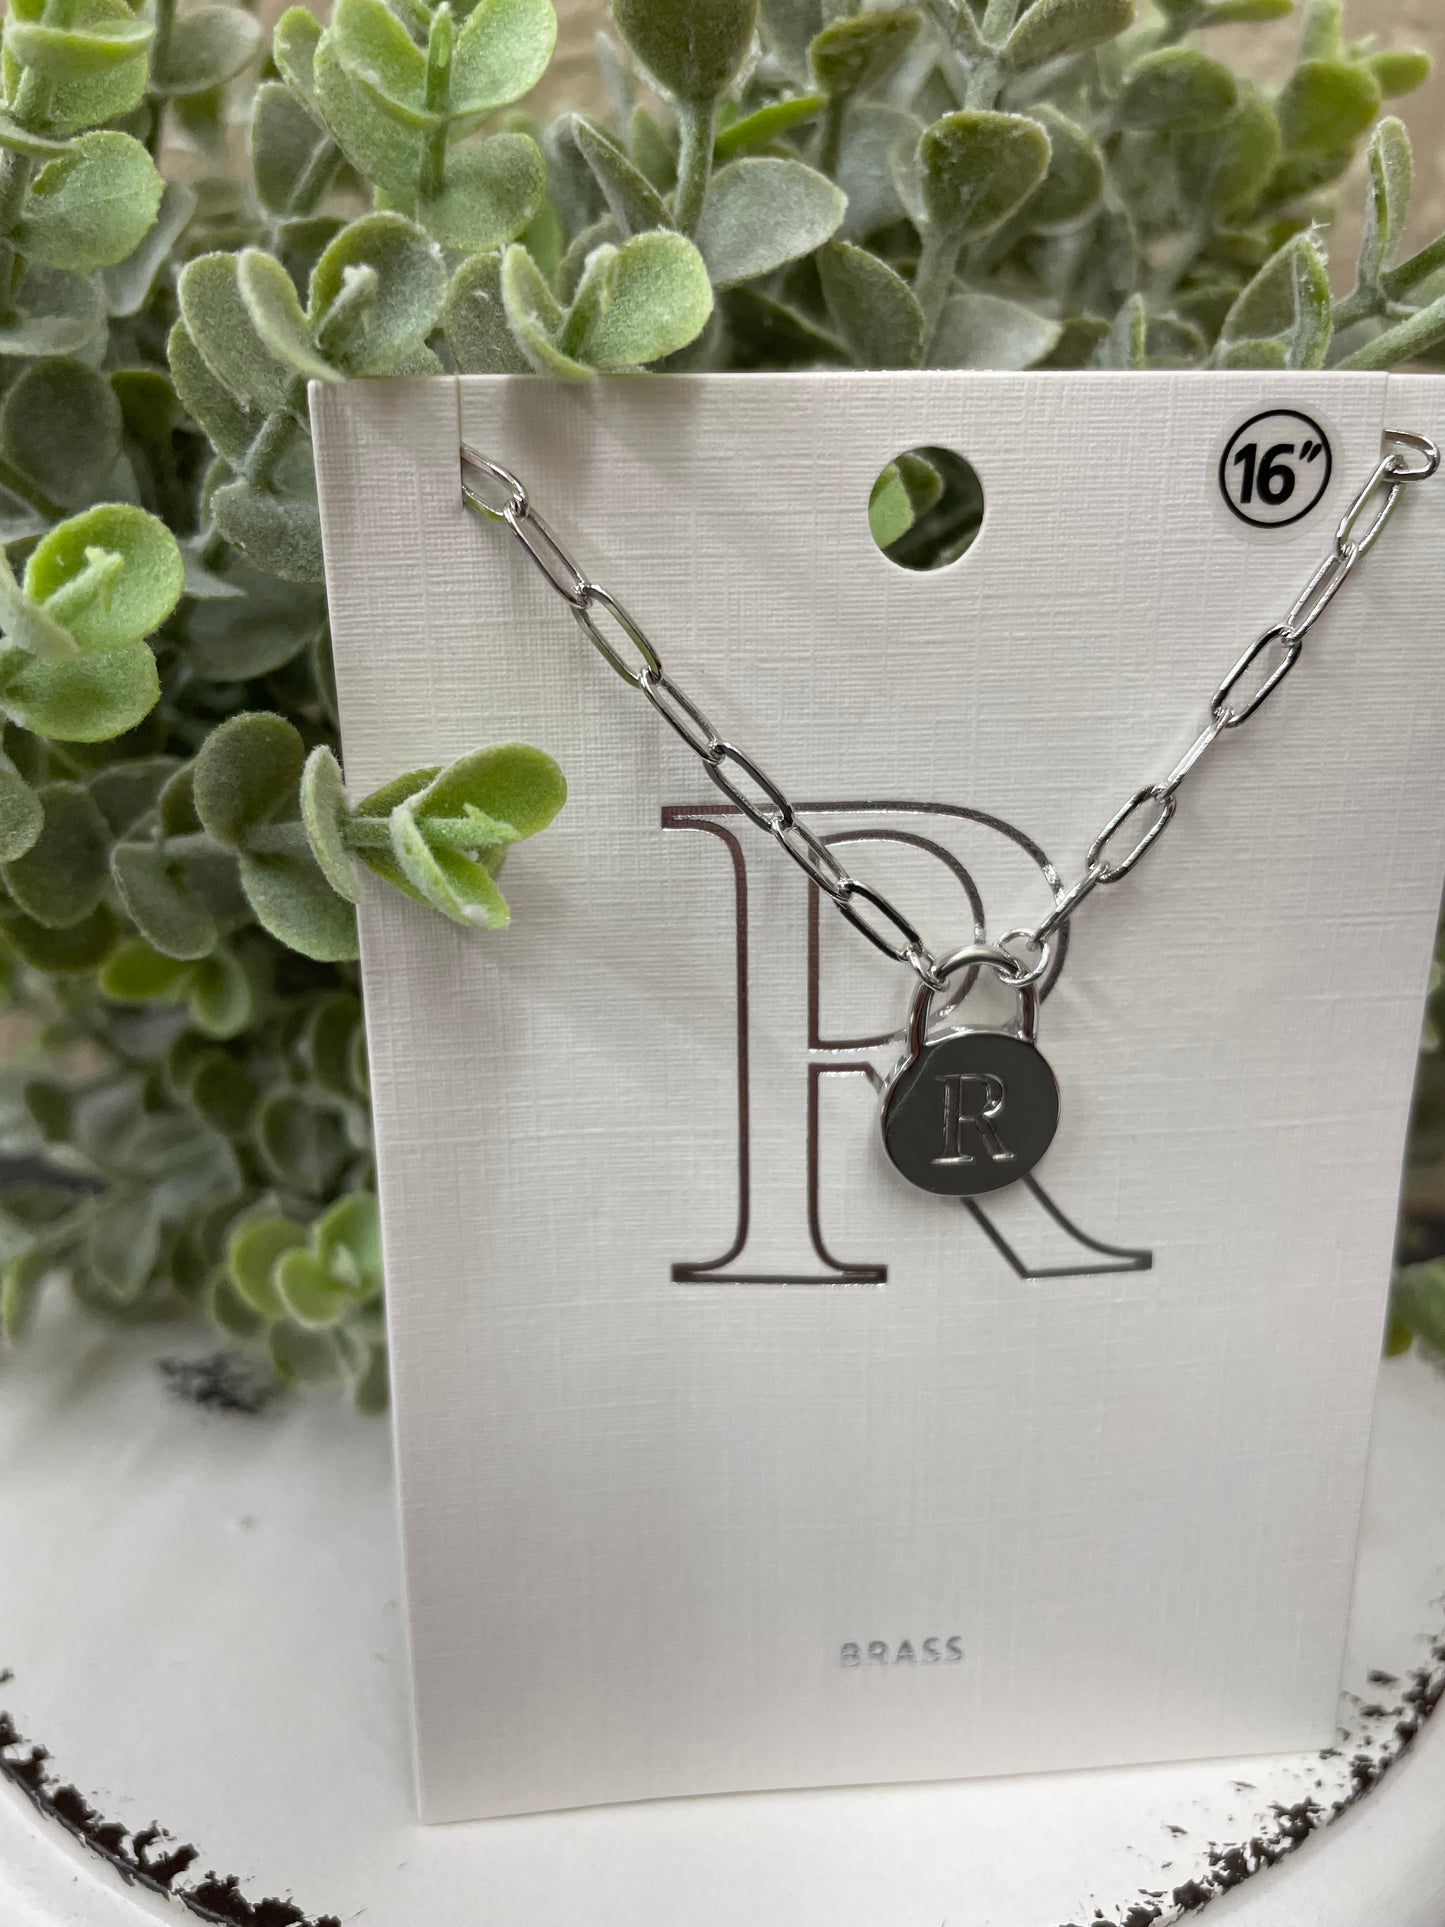 The Lock Initial Necklace